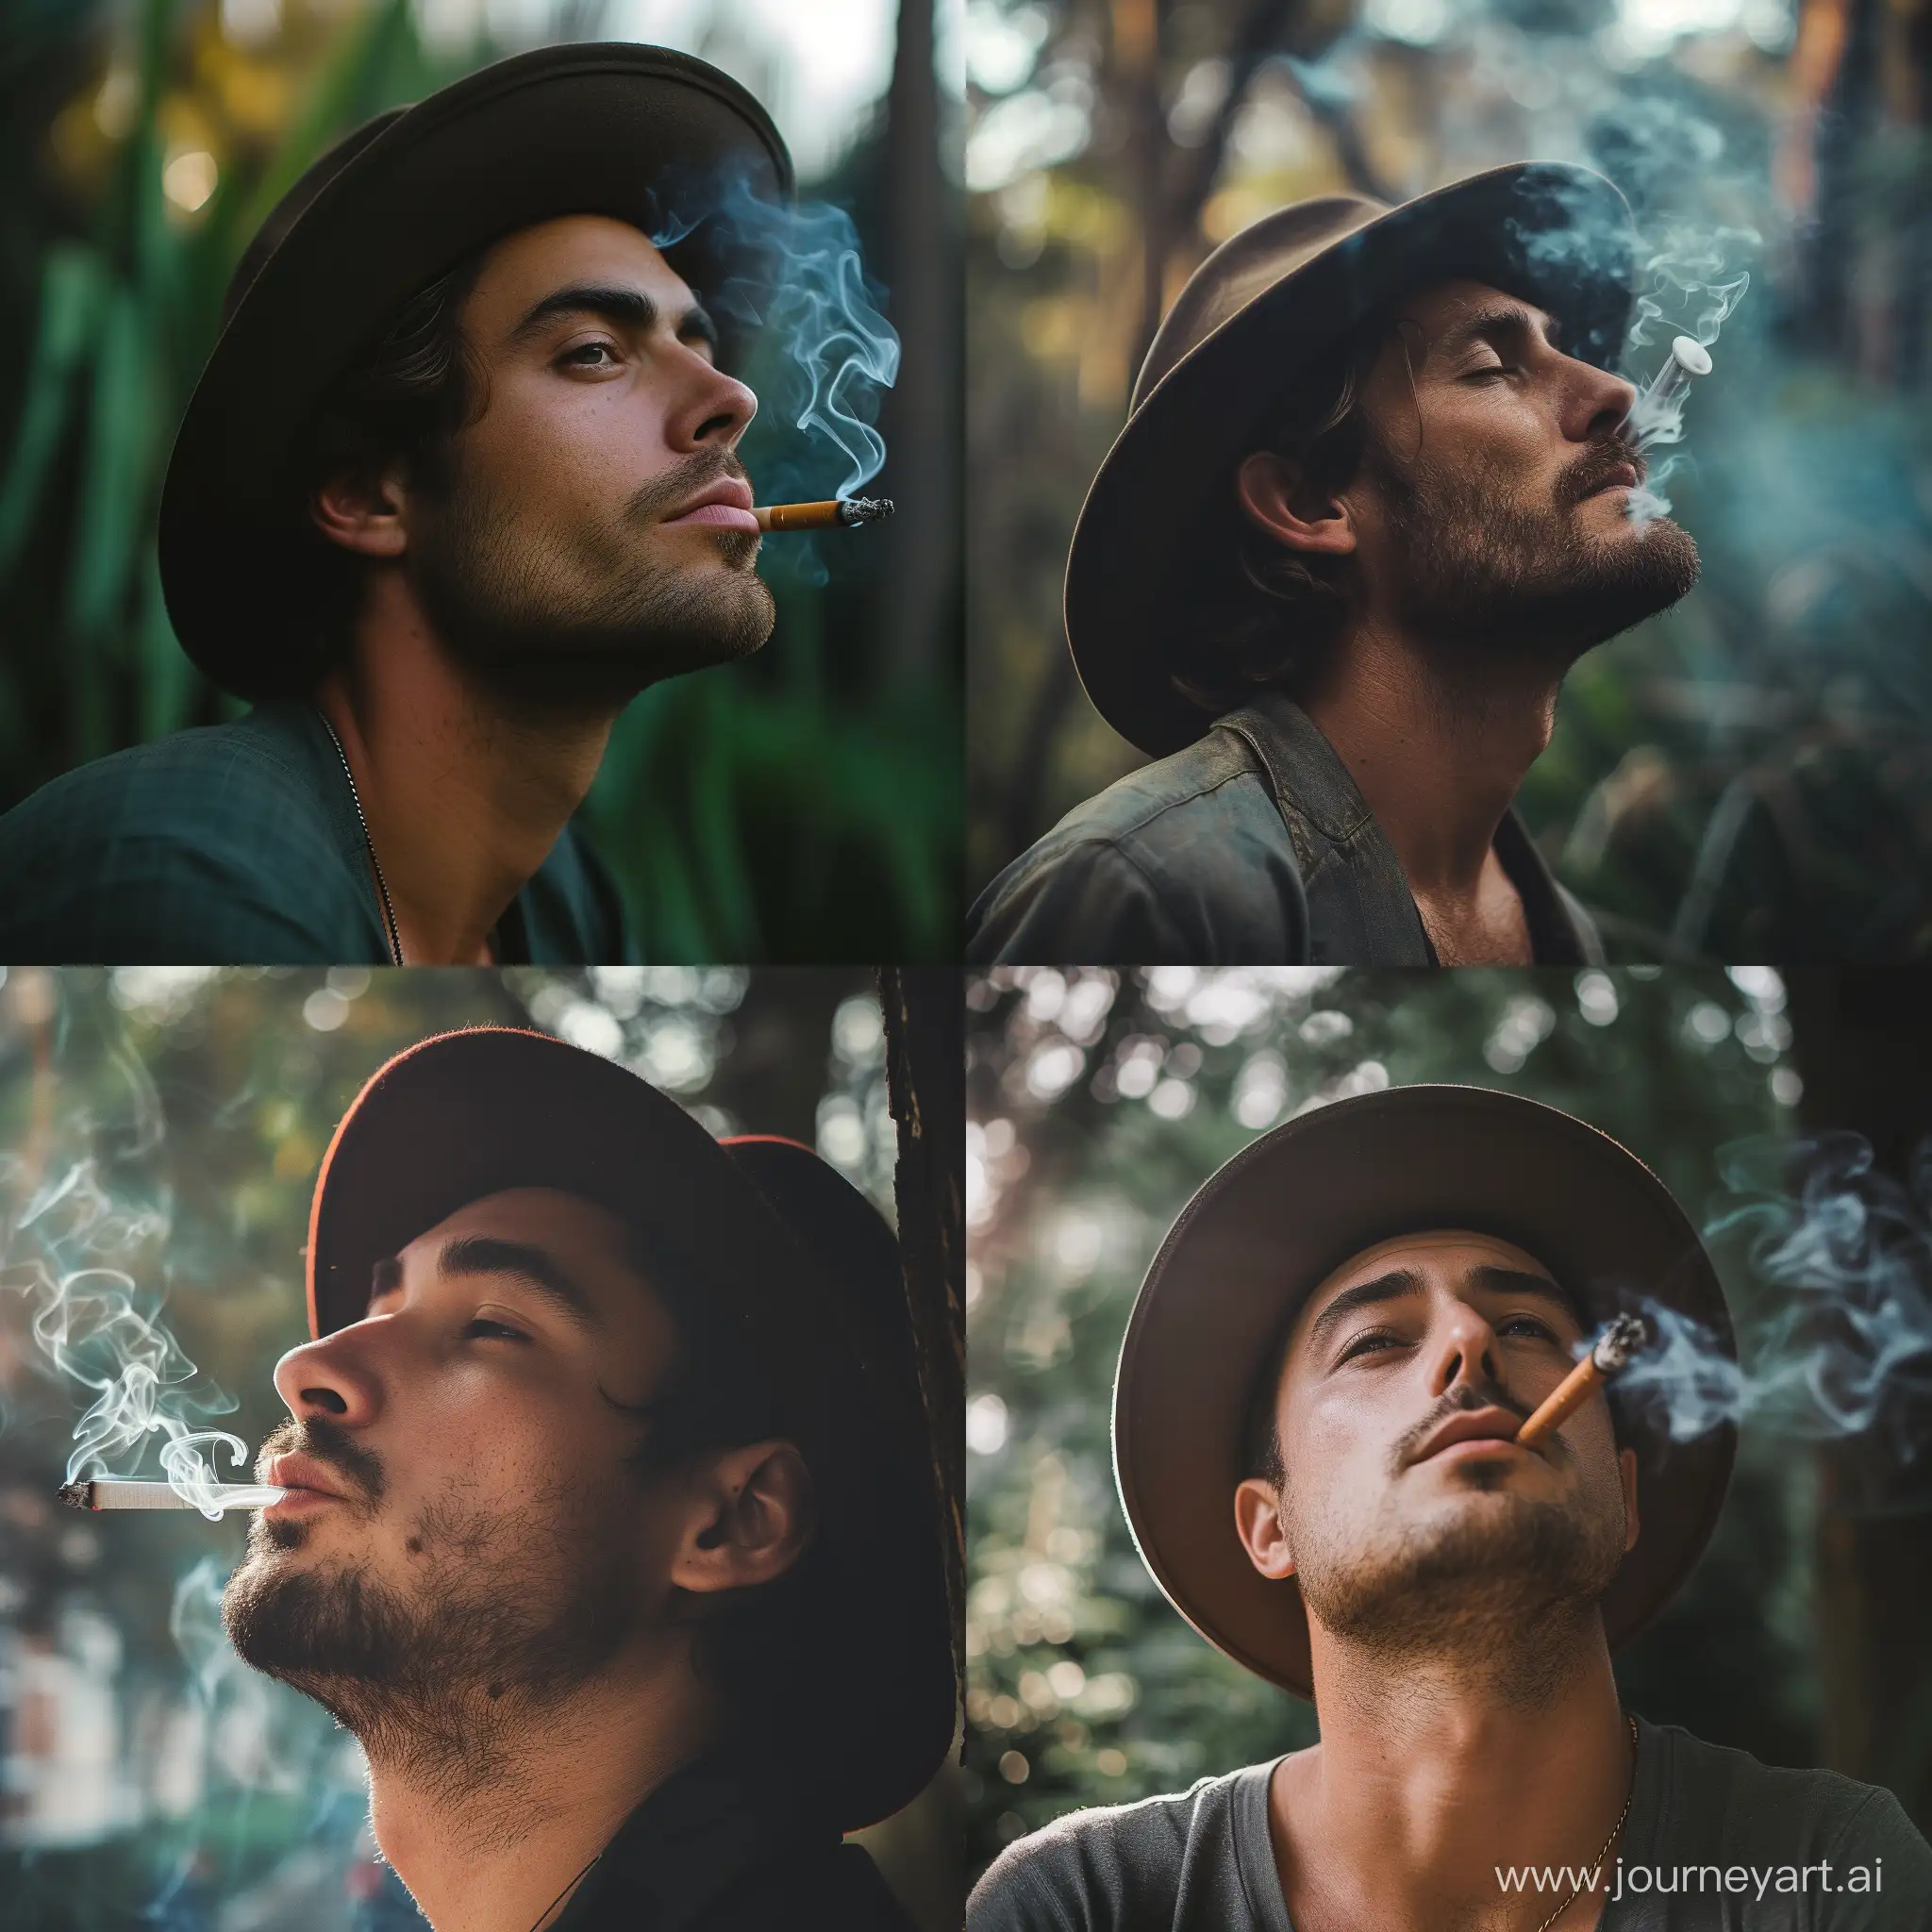 Stylish-Gentleman-with-Hat-Enjoying-a-Cigar-in-Cinematic-Outdoor-Setting